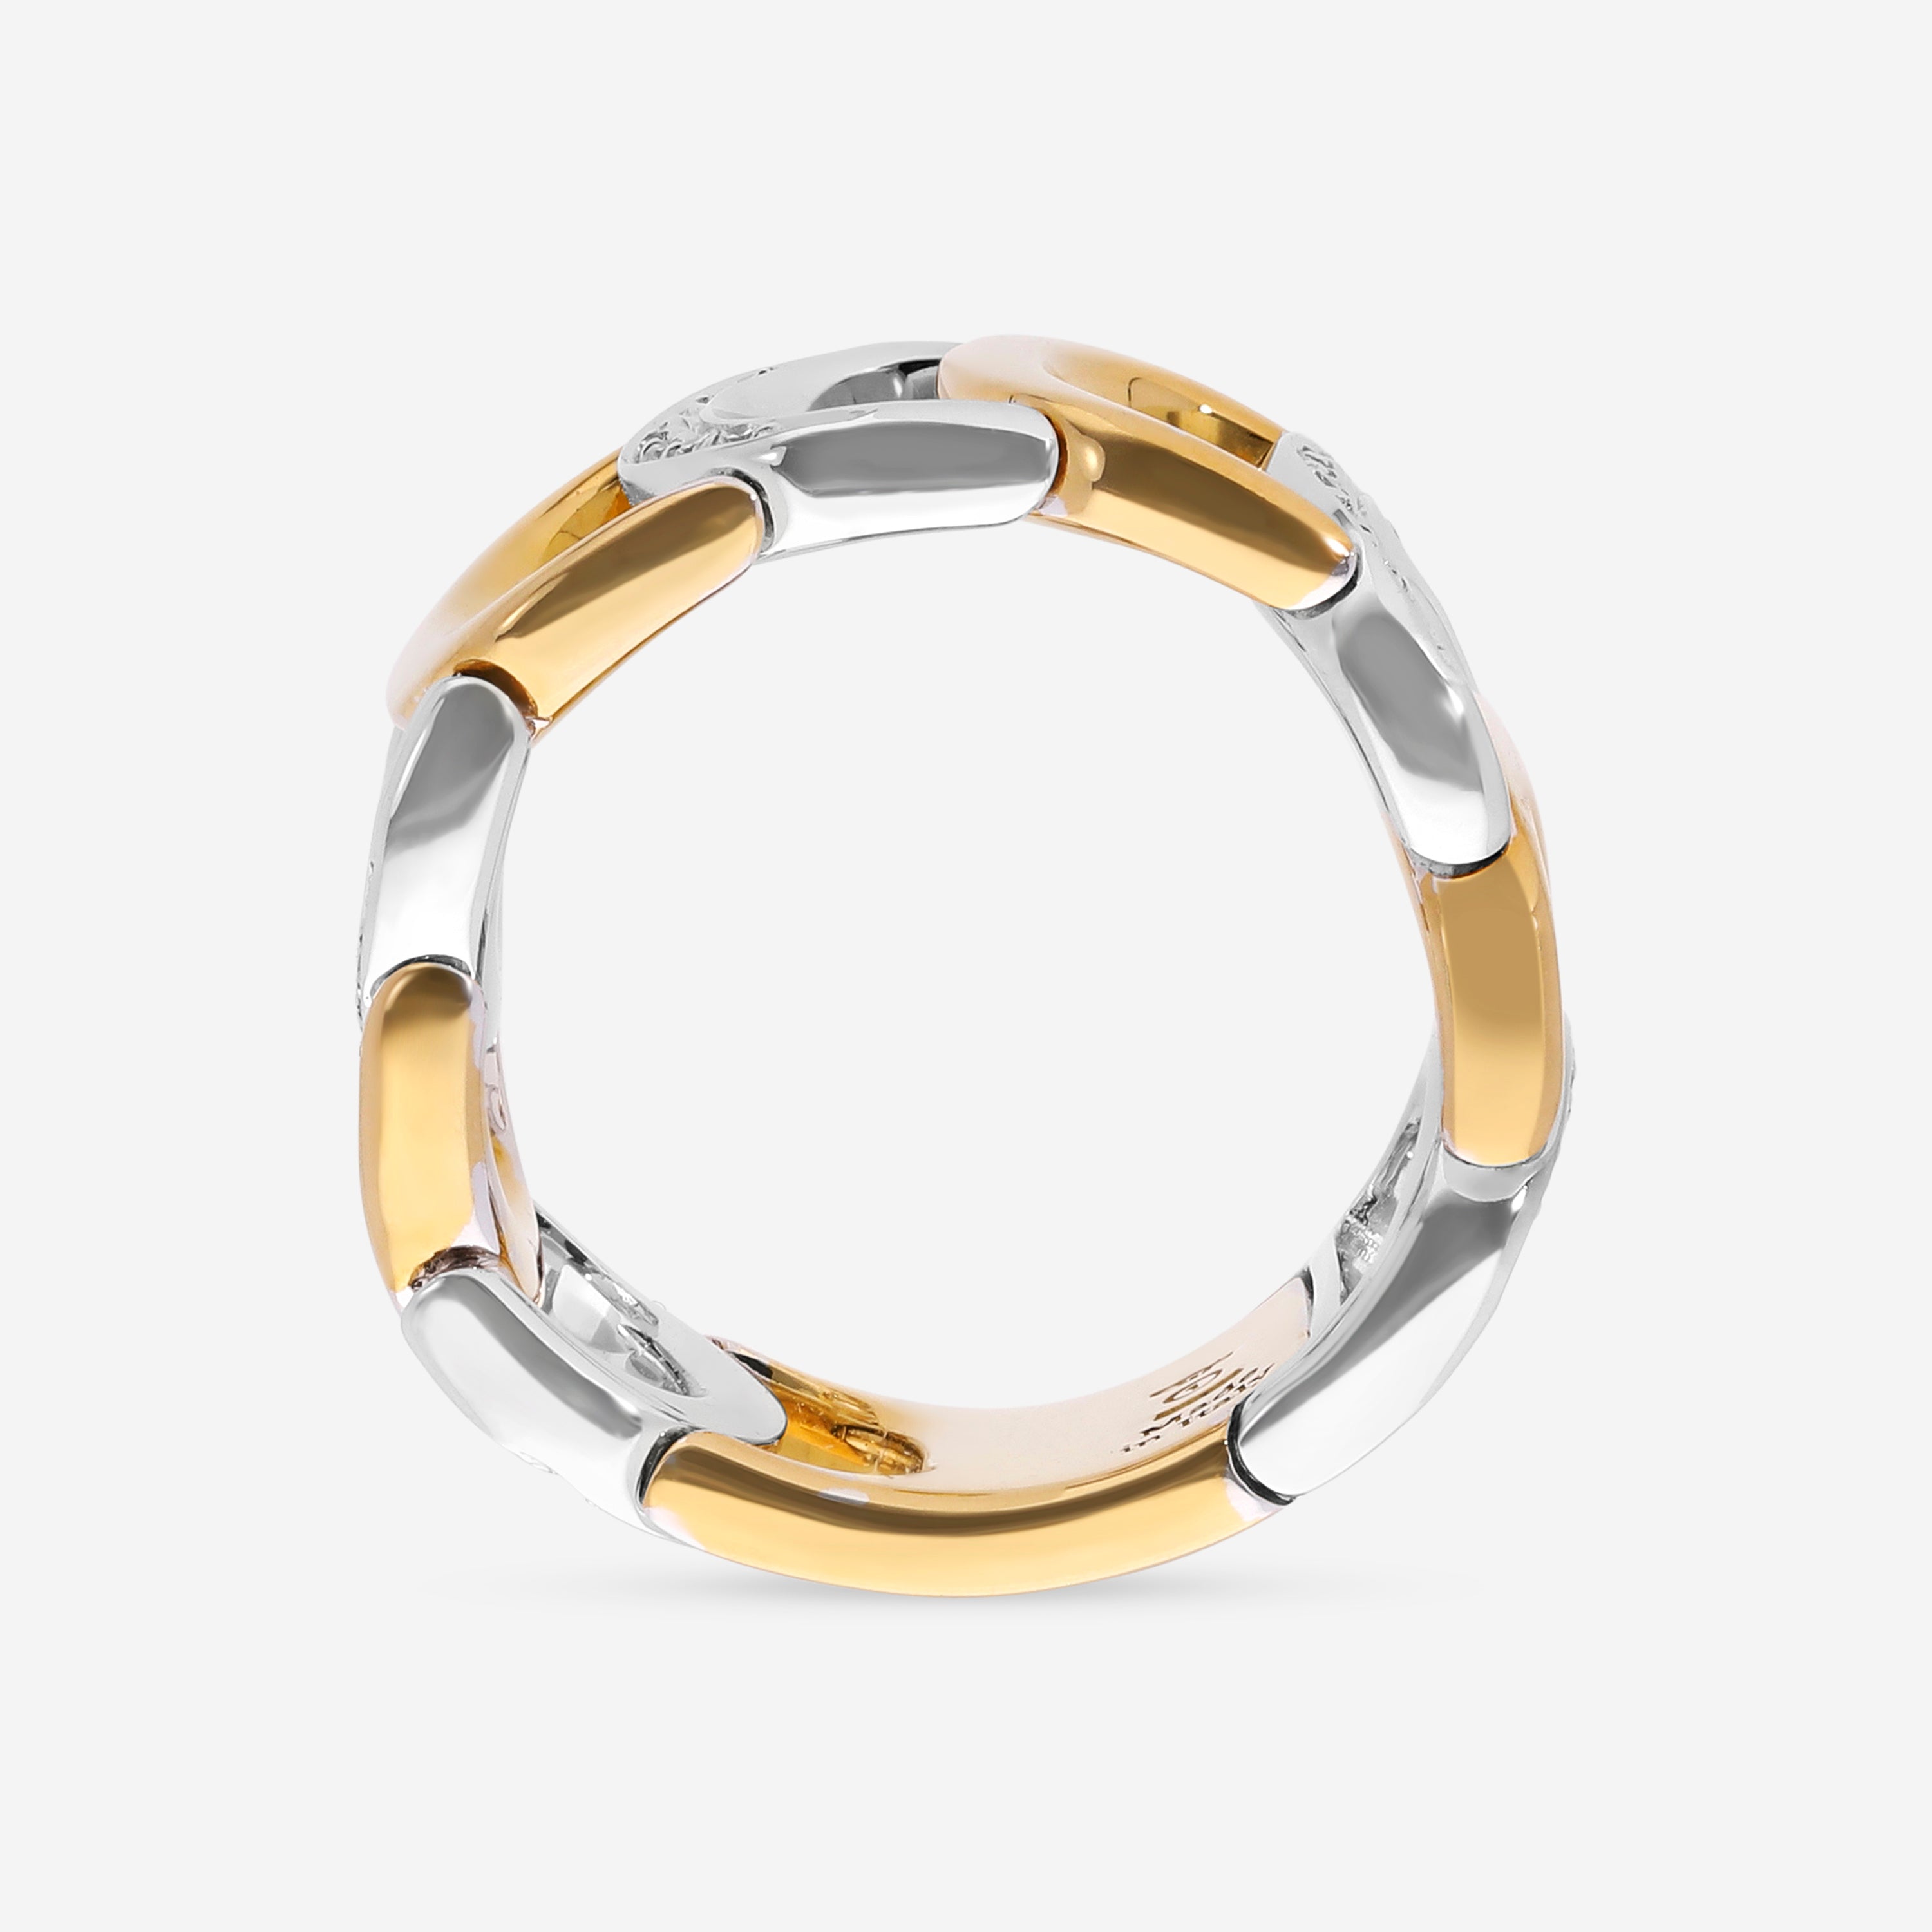 Damiani 18K Yellow Gold and 18K White Gold, Diamond Band Ring - THE SOLIST